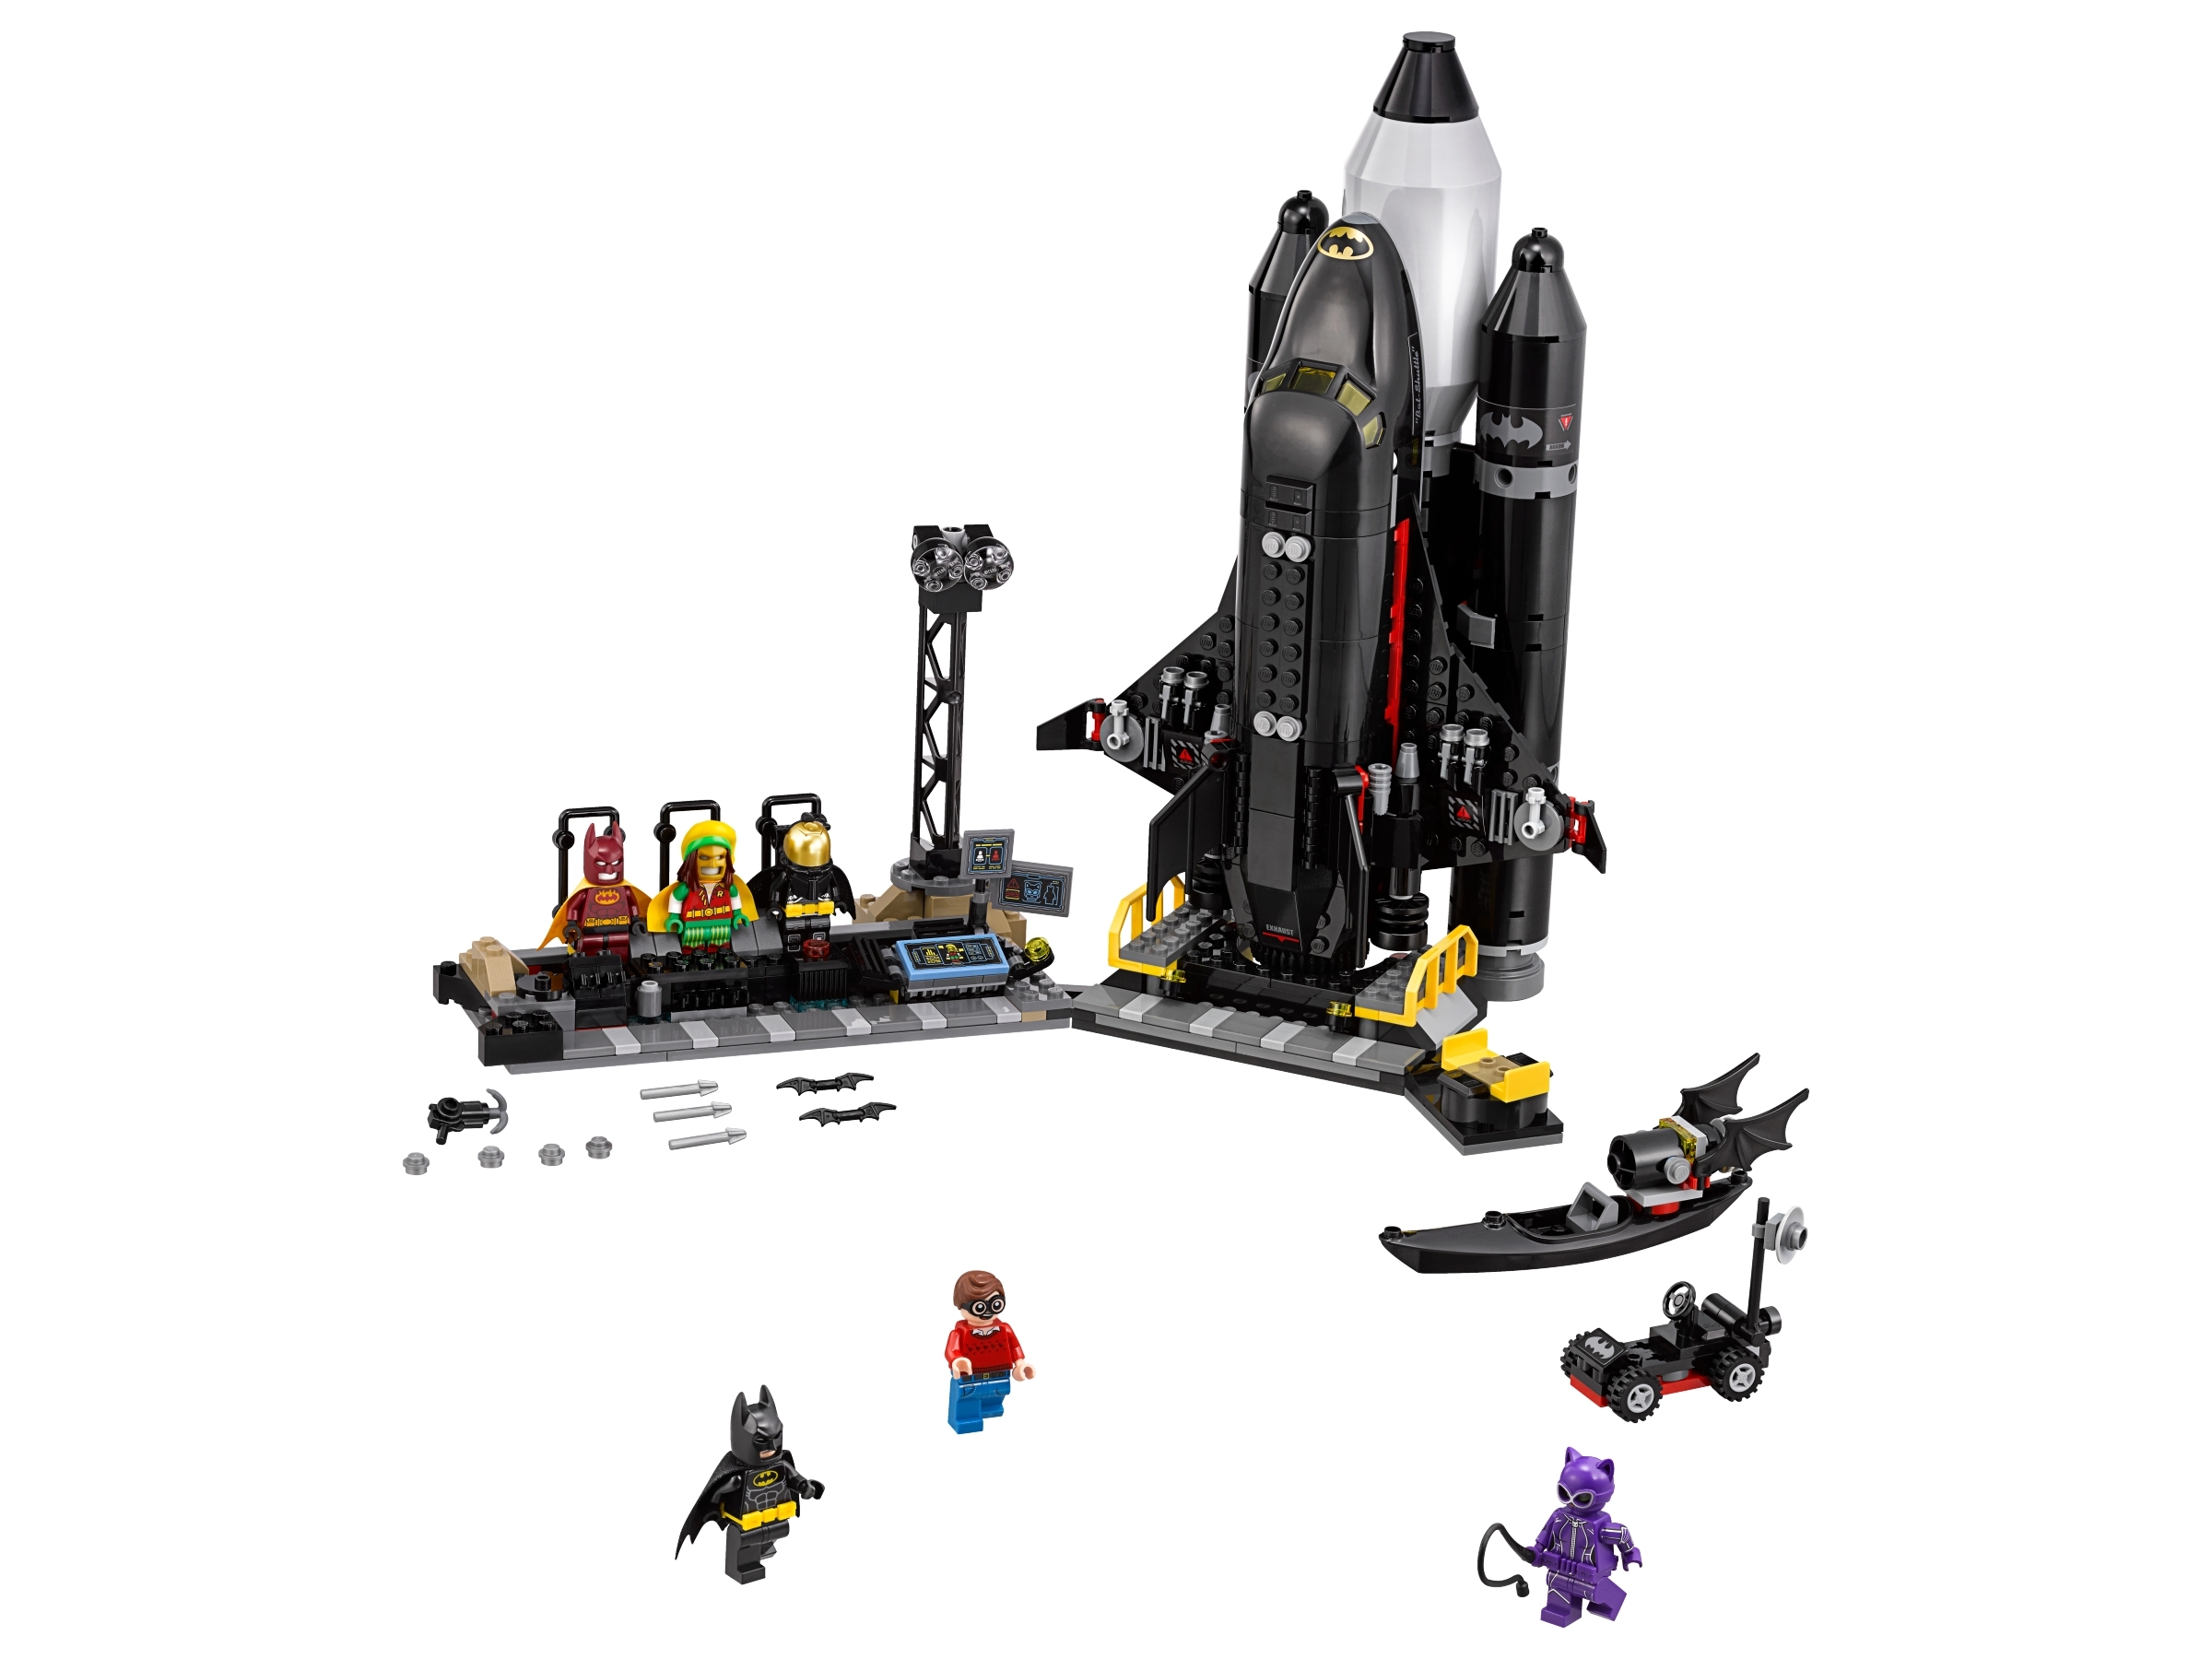 The Bat-Space Shuttle 70923 DC Buy online at the Official LEGO® Shop US